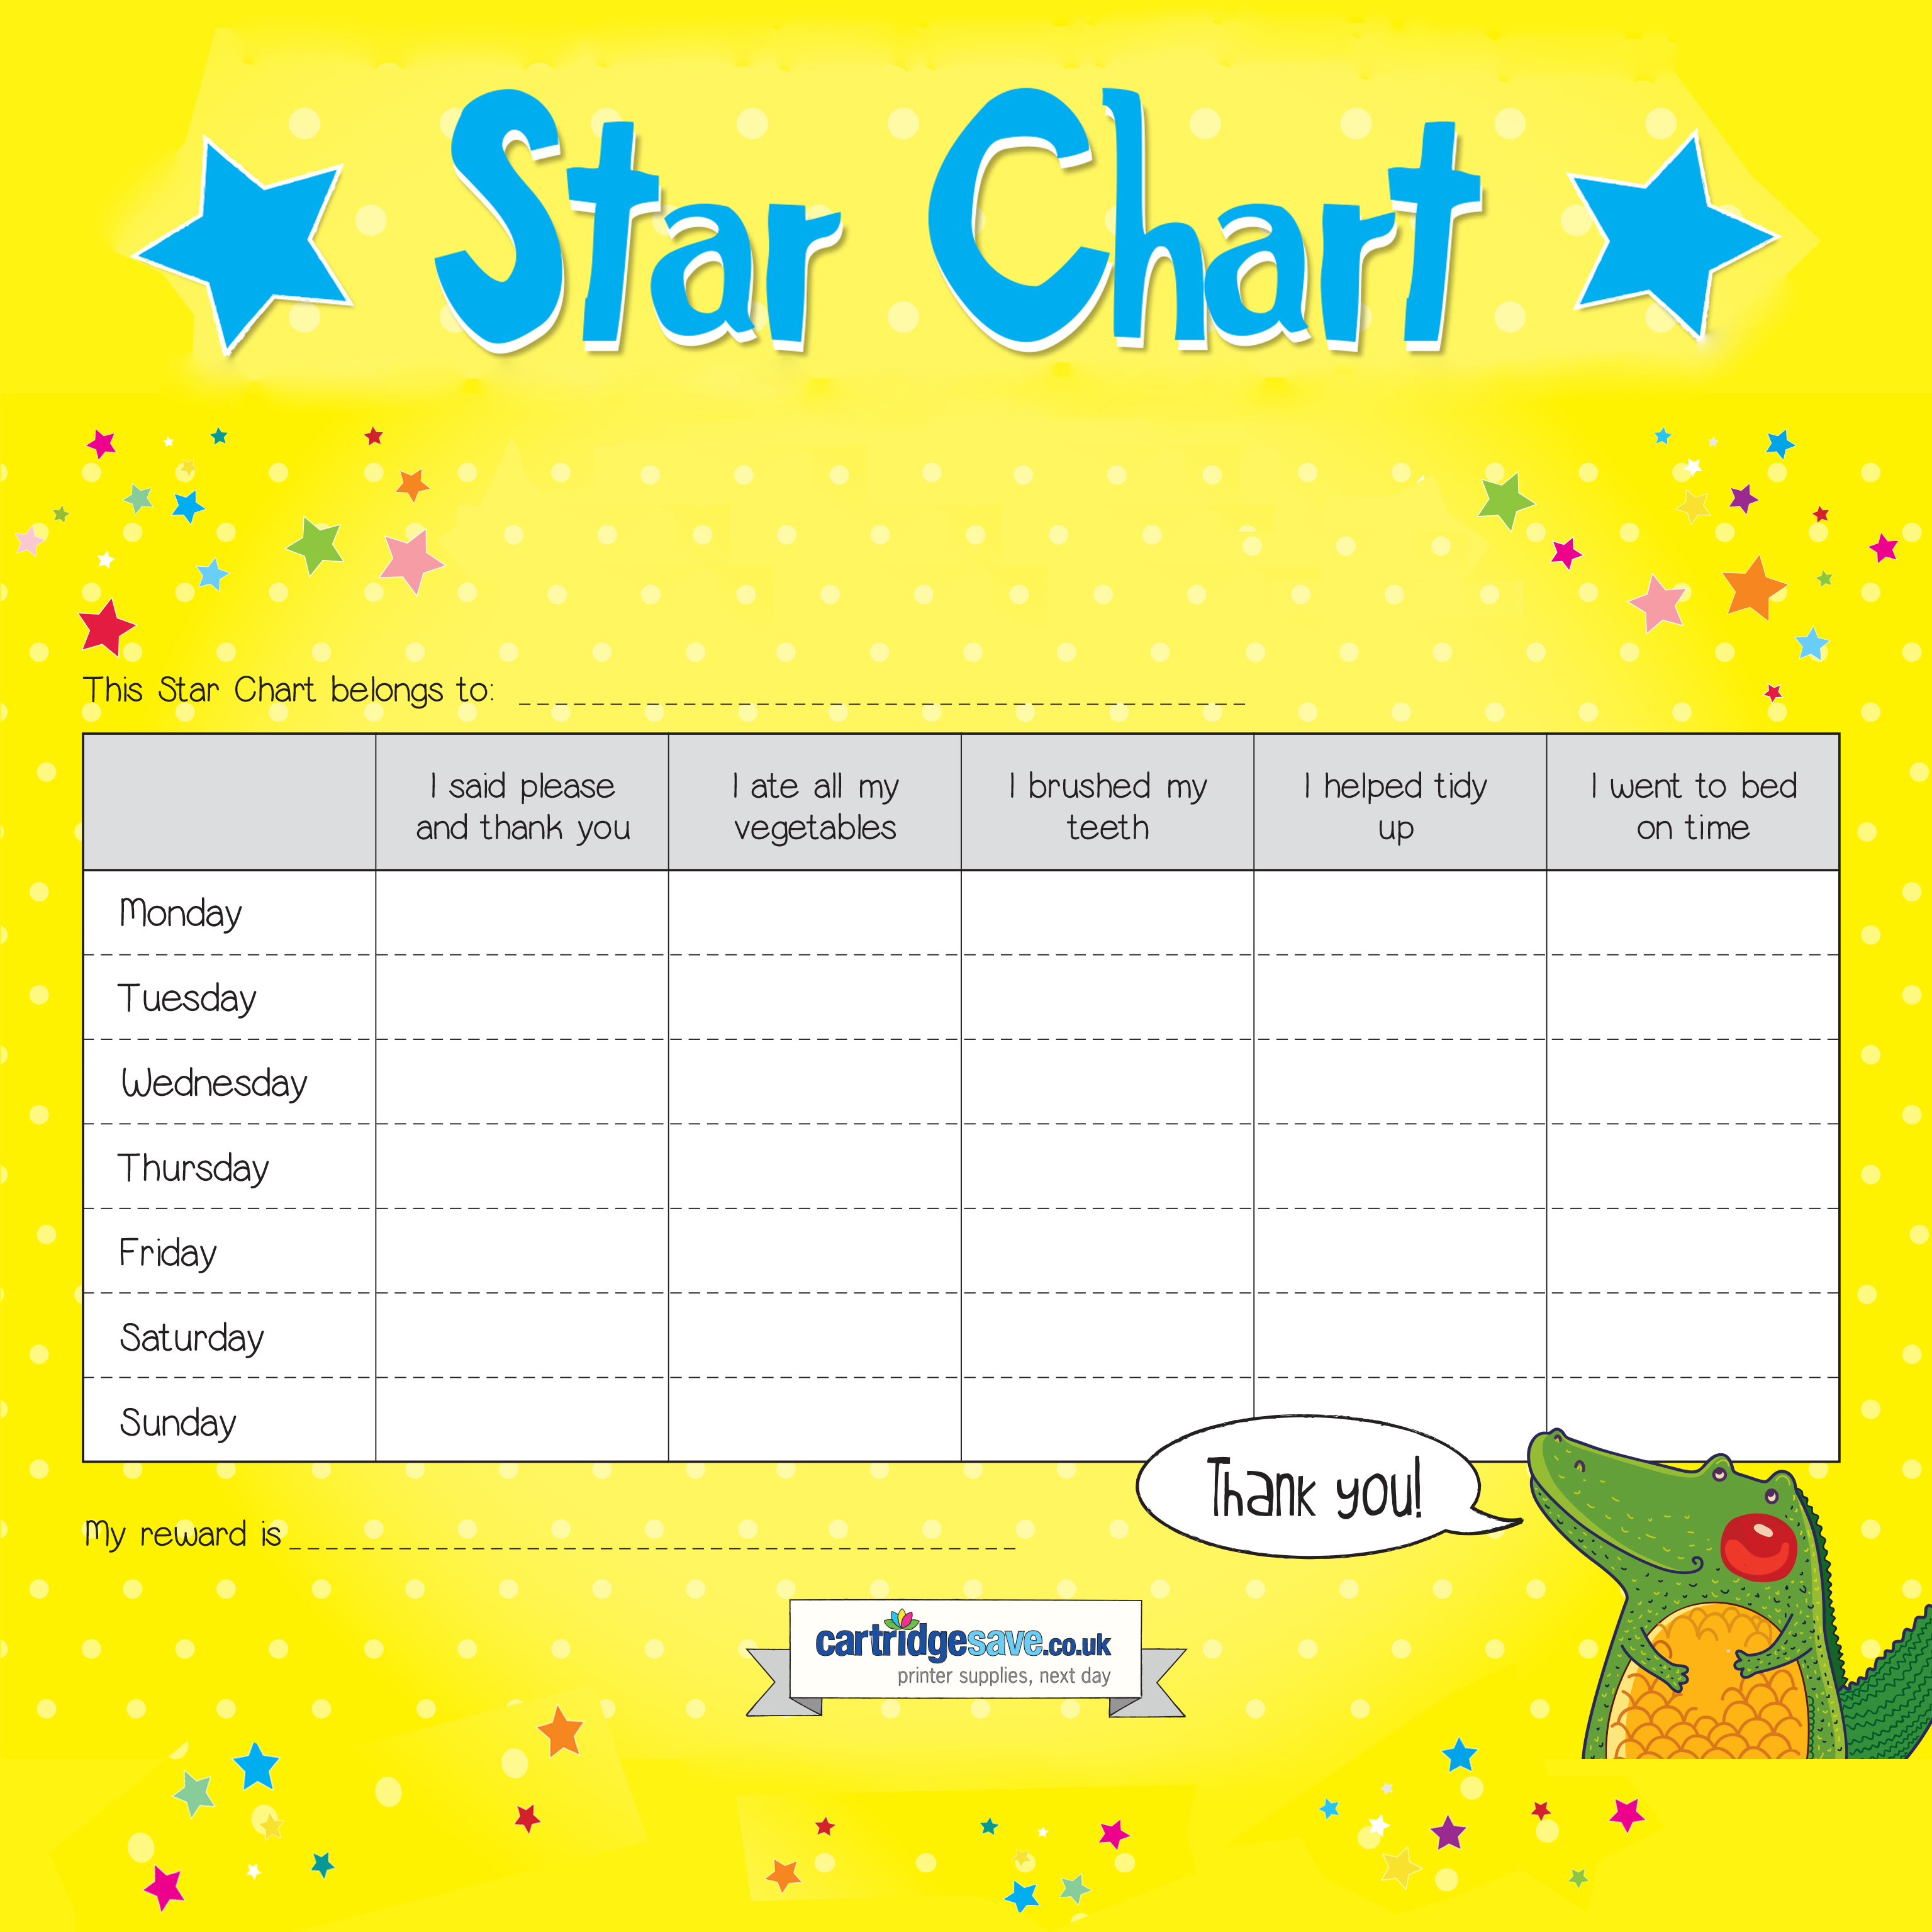 star-chart-to-print-out-print-what-matters